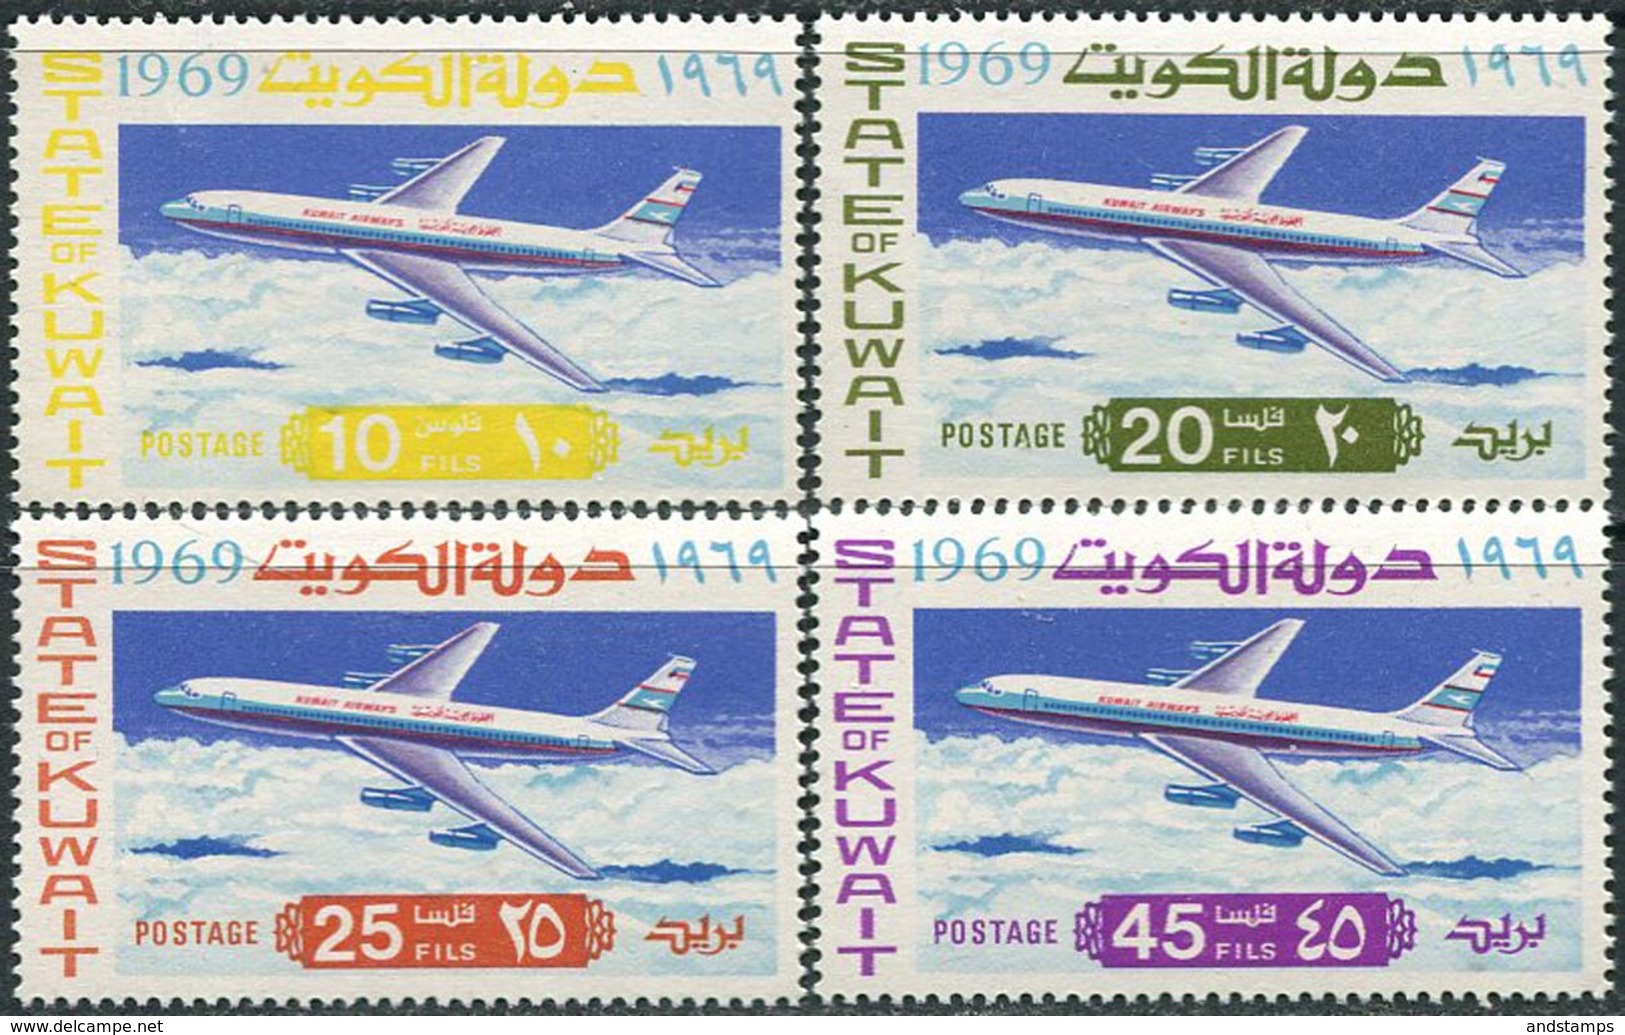 Kuwait 1969. Michel #429/32 MNH/Luxe. Commissioning Of Boeing 707 Jet Aircraft By Kuwait Airways. (Ts21) - Flugzeuge